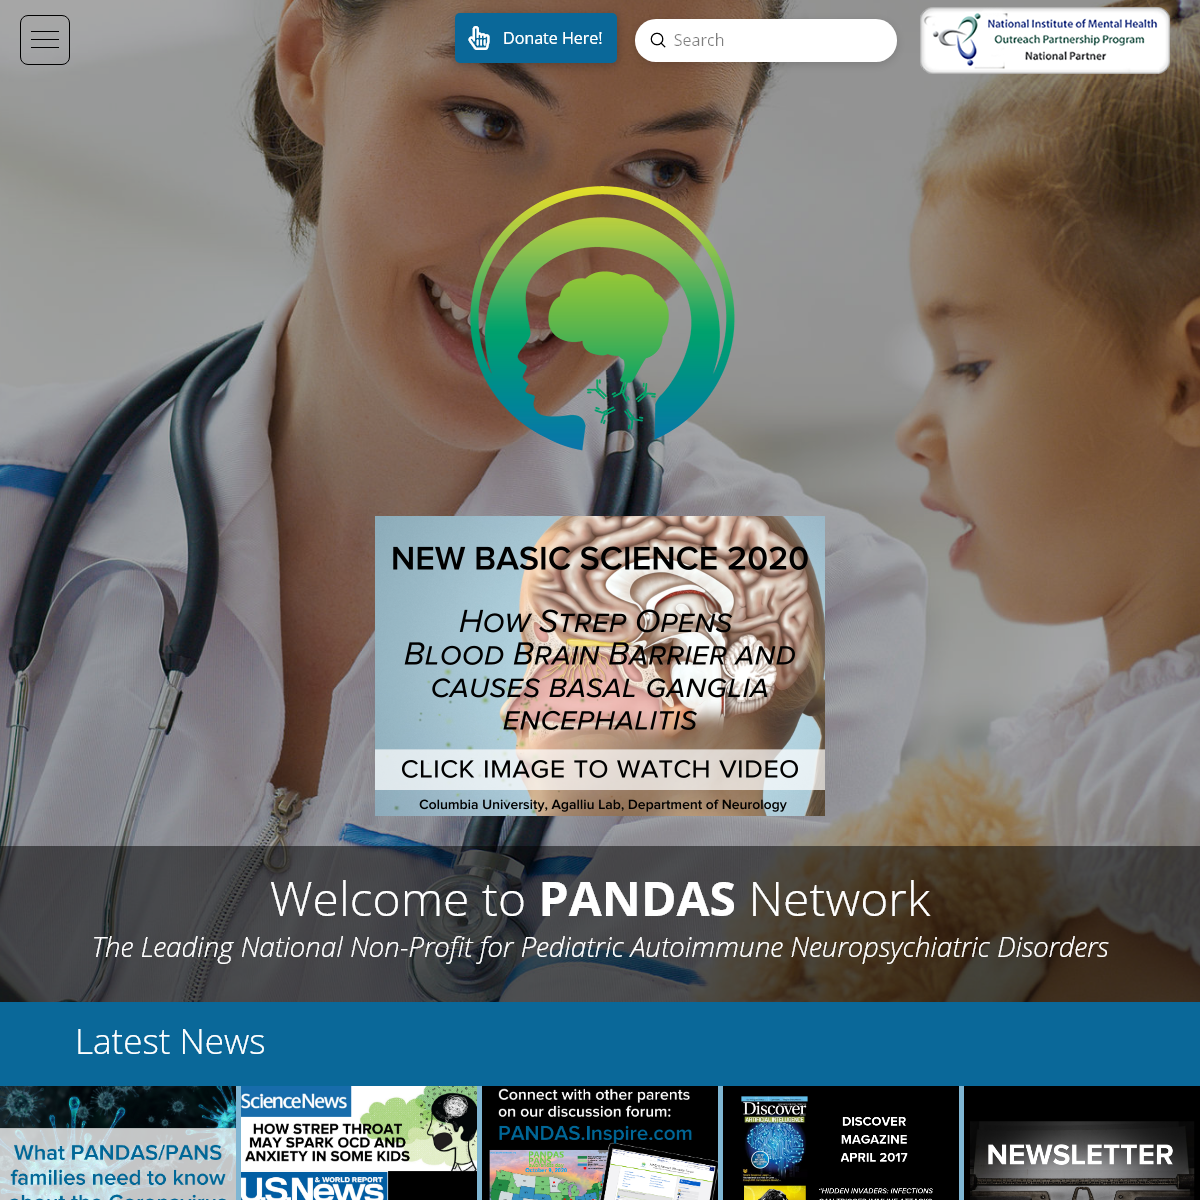 A complete backup of pandasnetwork.org